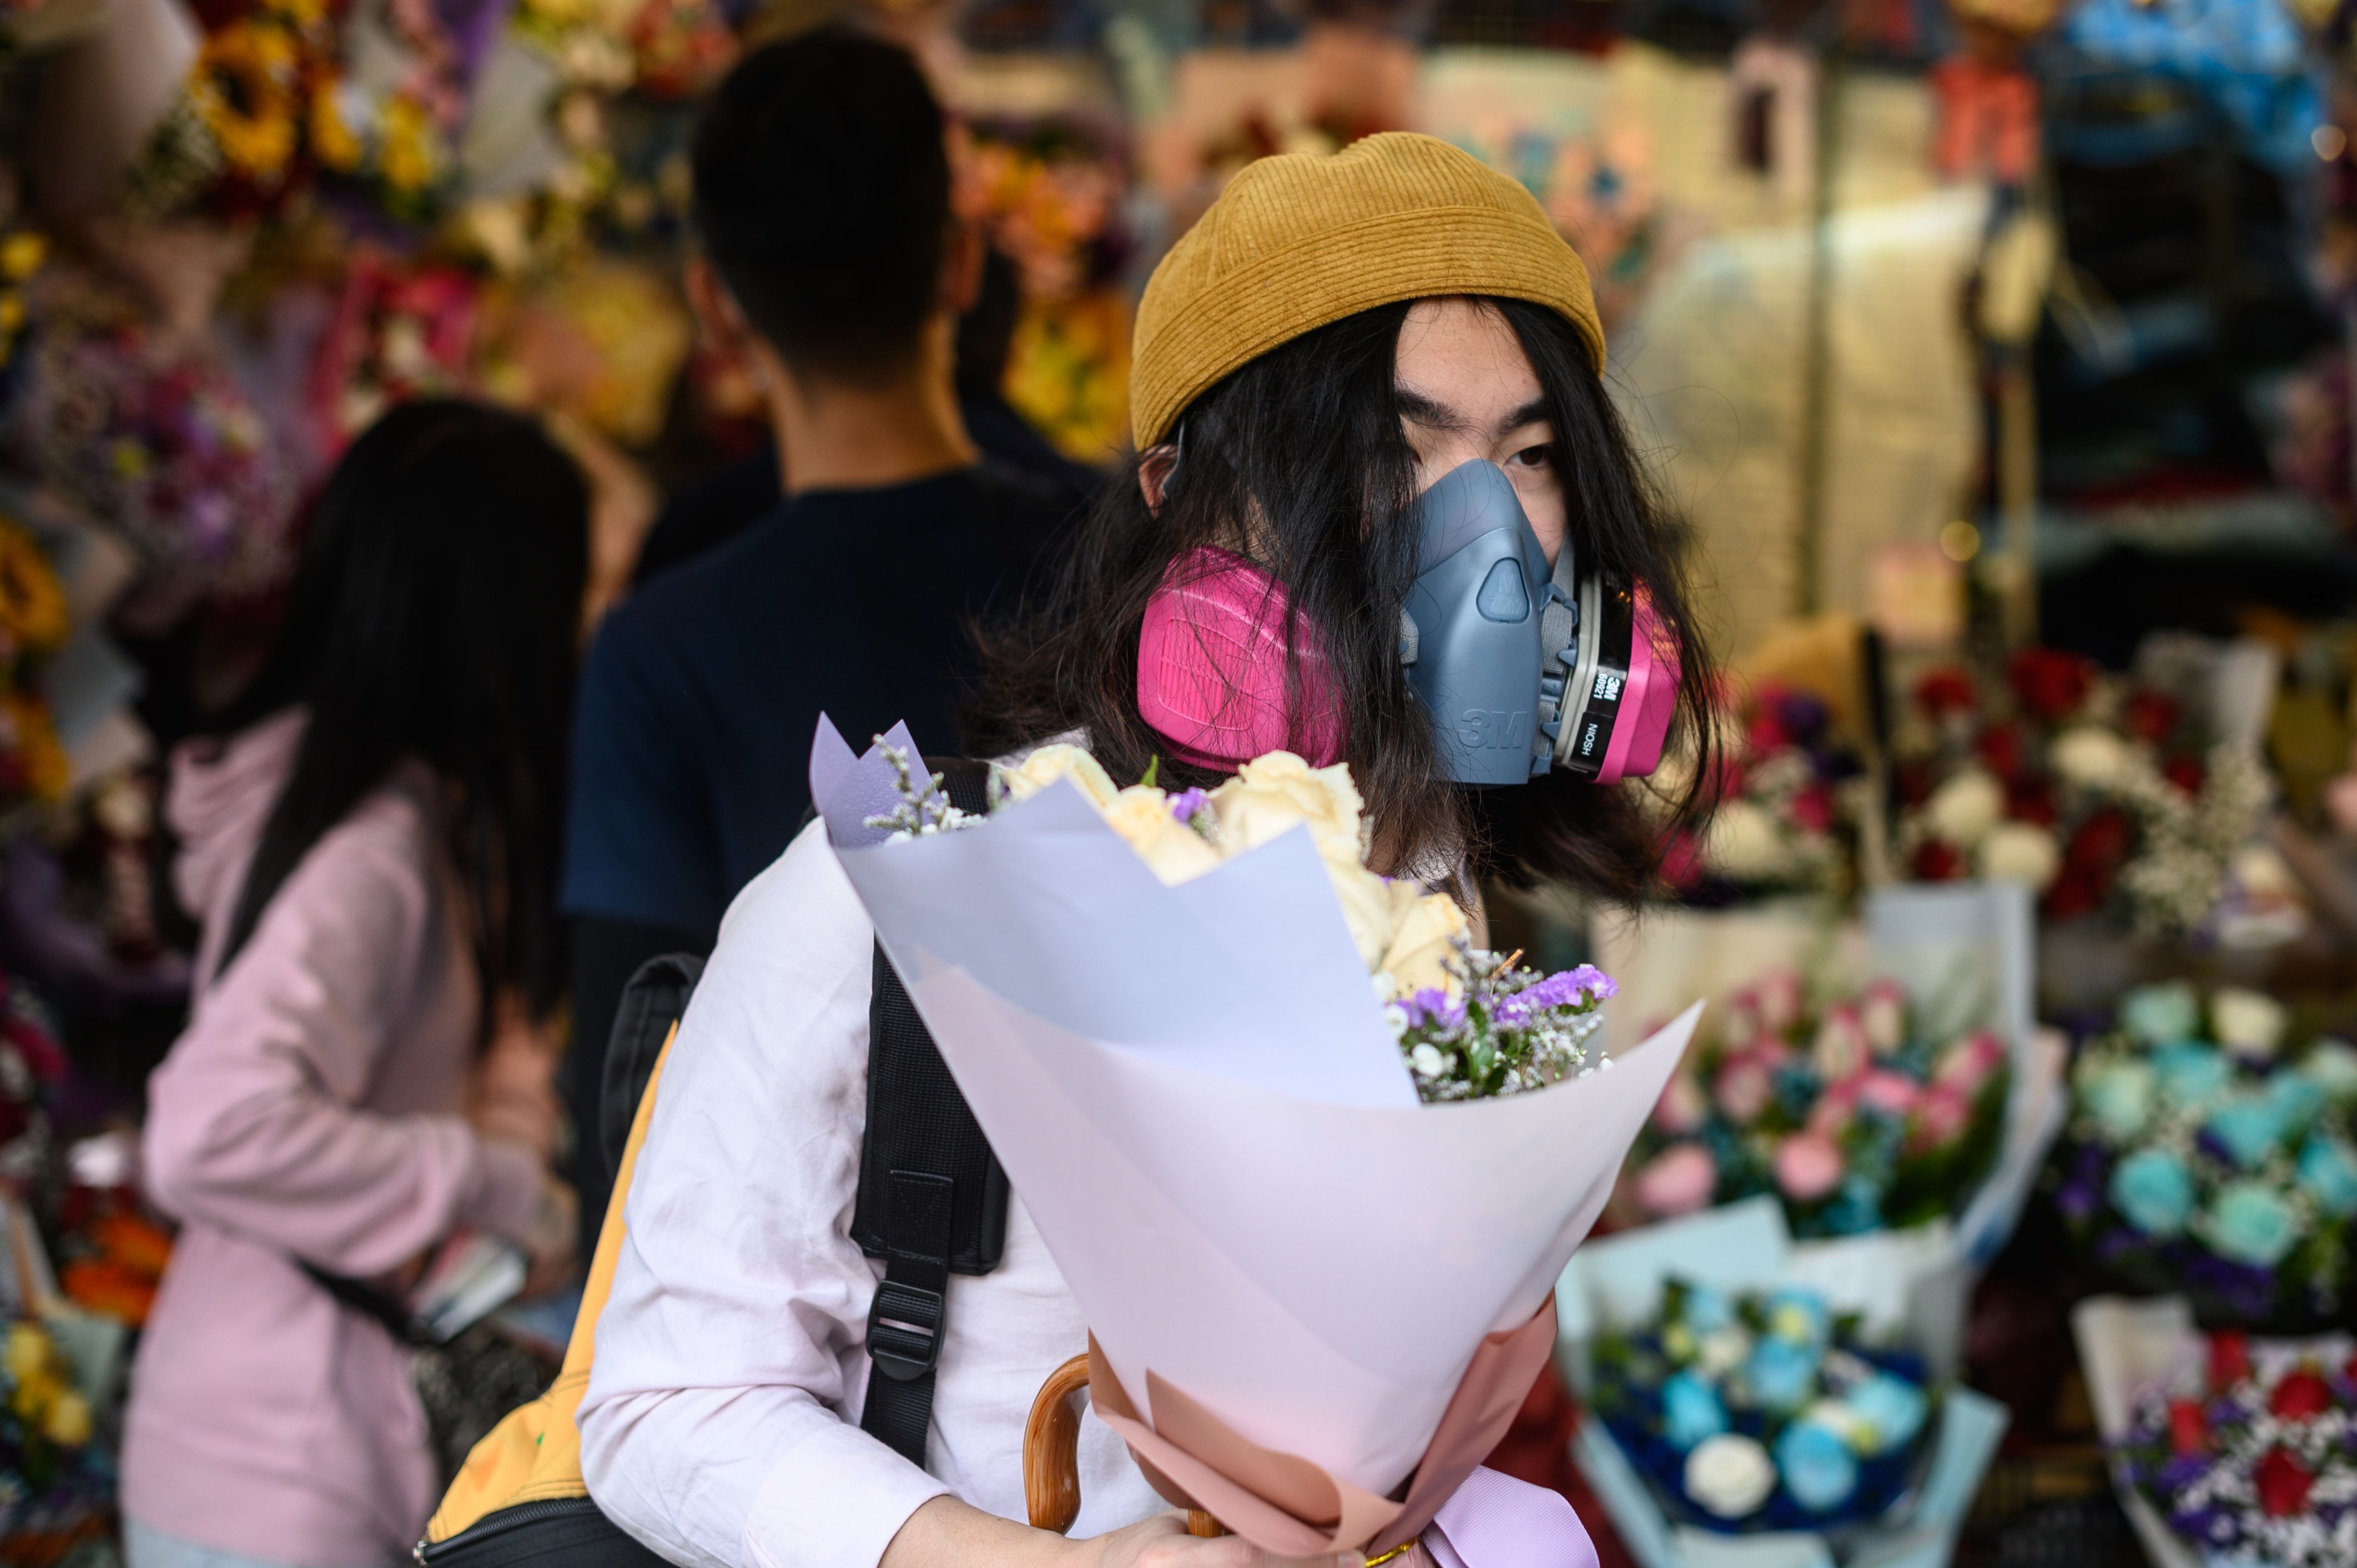 In this image, a woman carries a bouquet of flowers while wearing an industrial gas mask